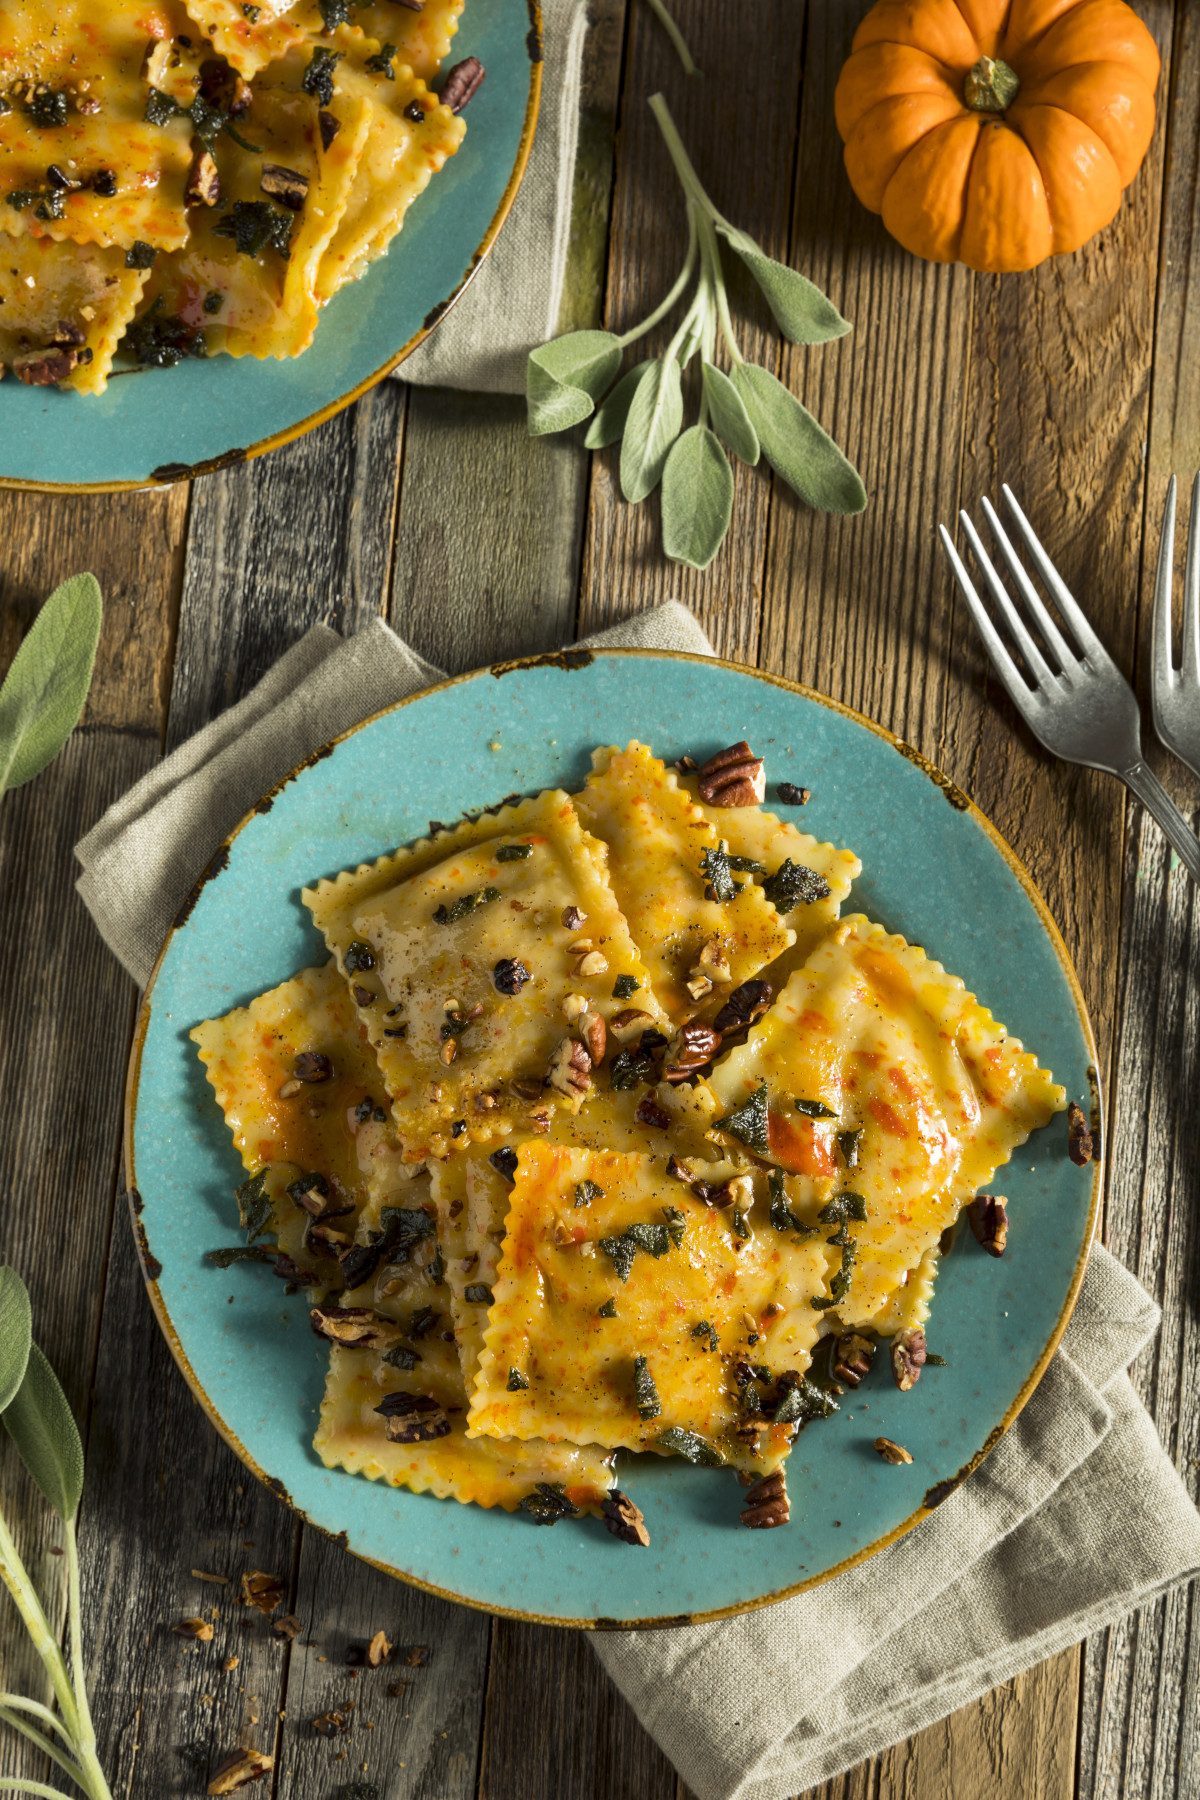 Vertical view of pumpkin ravioli with a small pumpkin and sage on a wooden table.